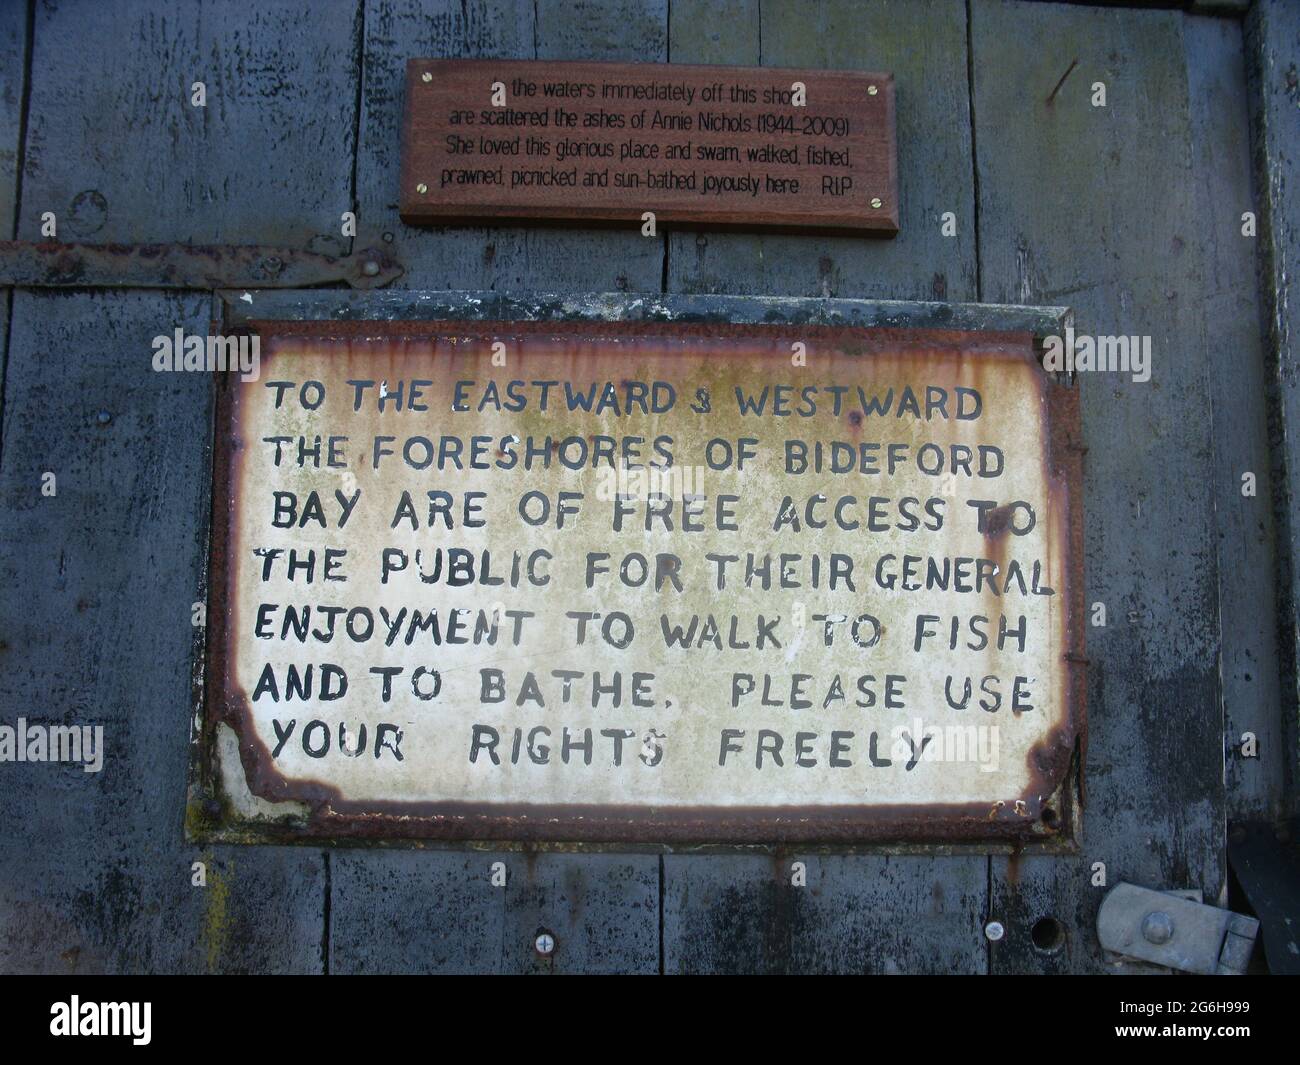 Please use your rights freely. Buck's Mills. South west coast path. North Devon. West country. England. UK Stock Photo